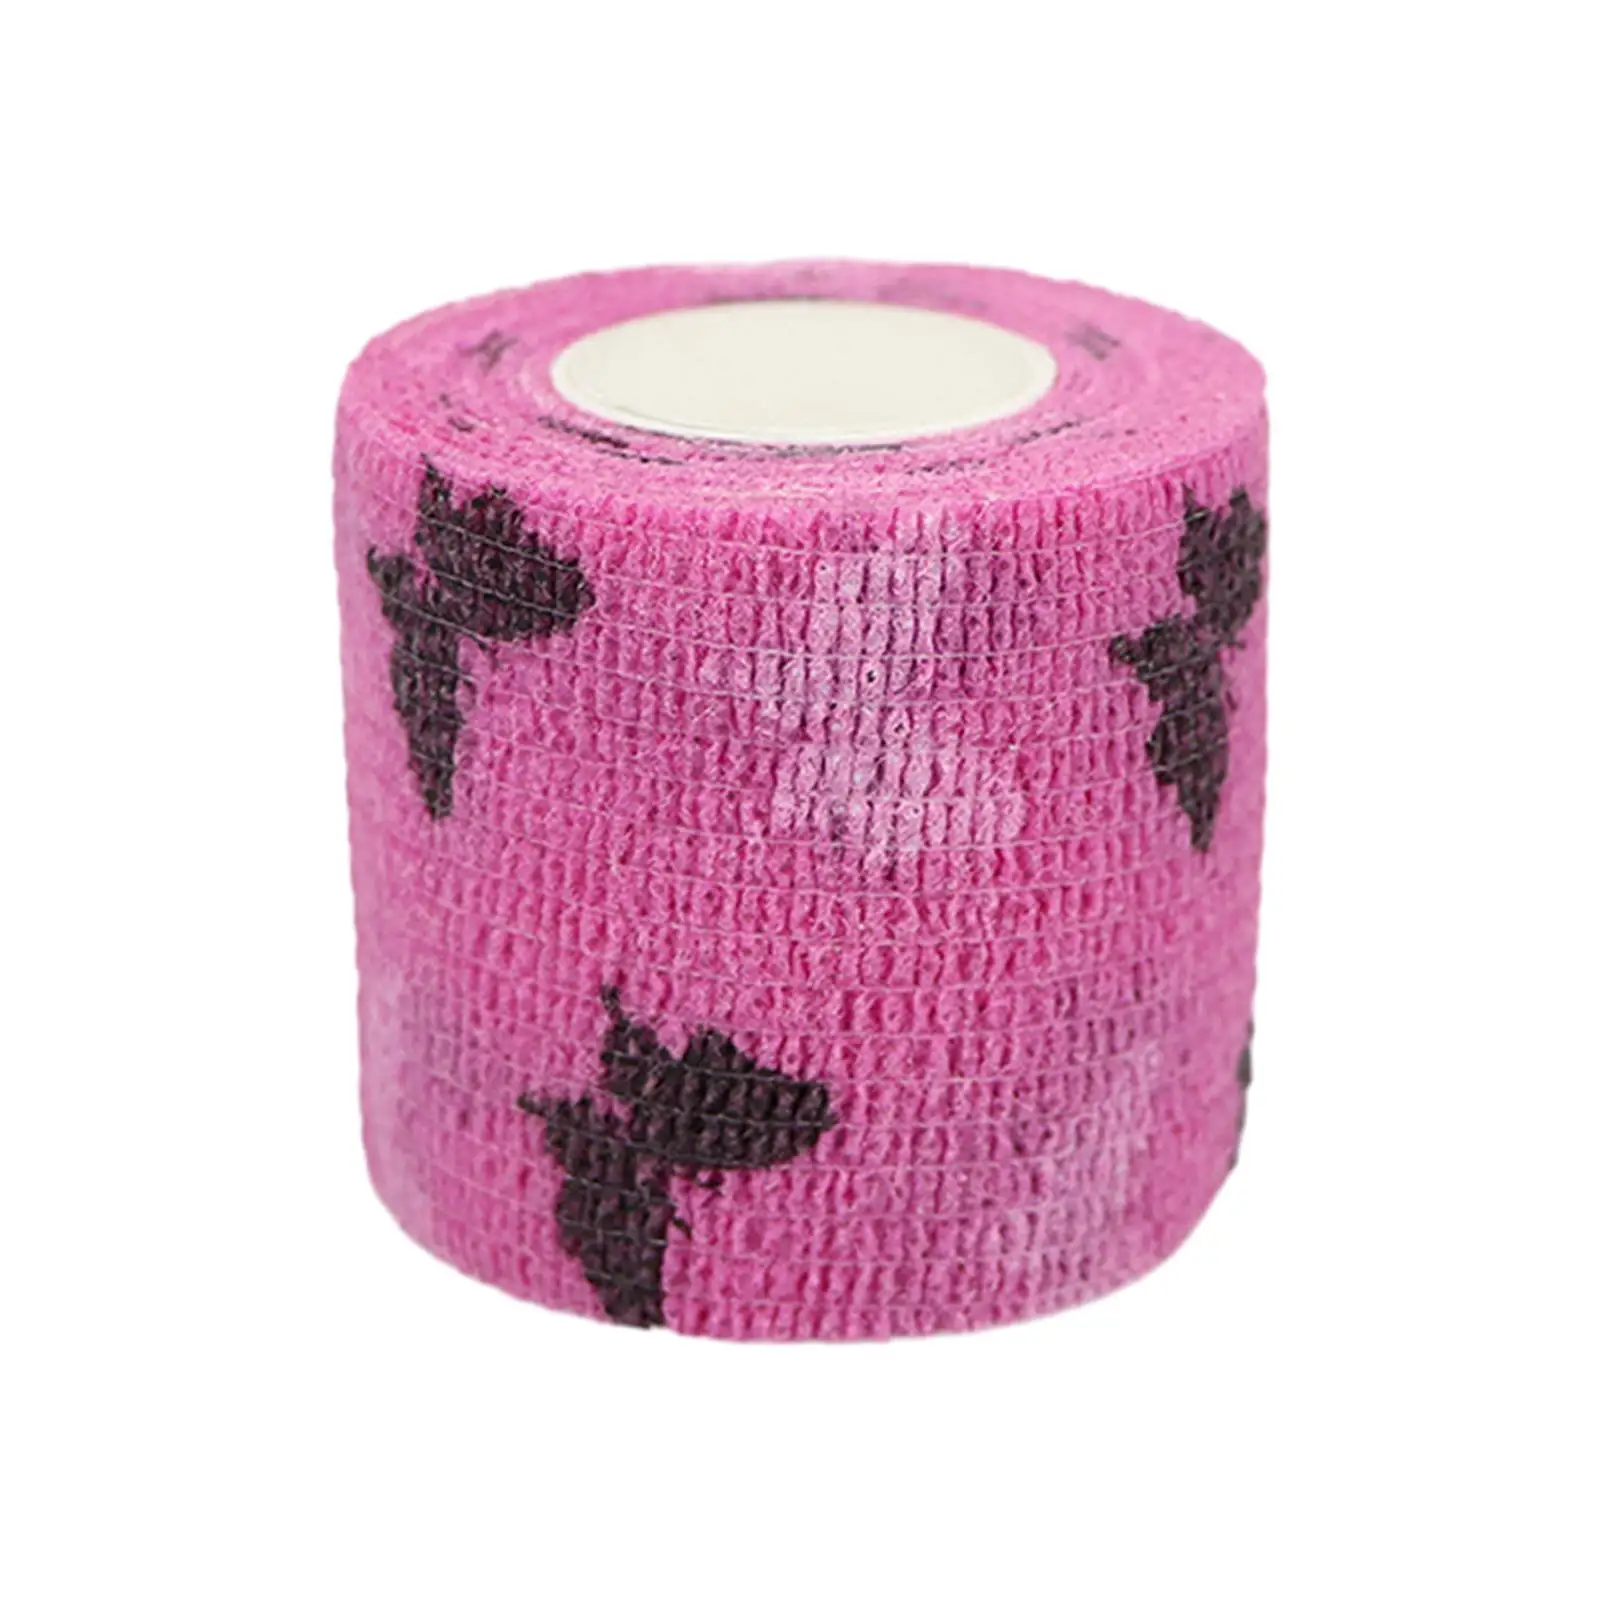 Self Adhesive Elastic Bandage First Aid Supplies Anti Wear Cohesive Bandages for Pet Small Animal Horse Legs Wrist Ankle Sports